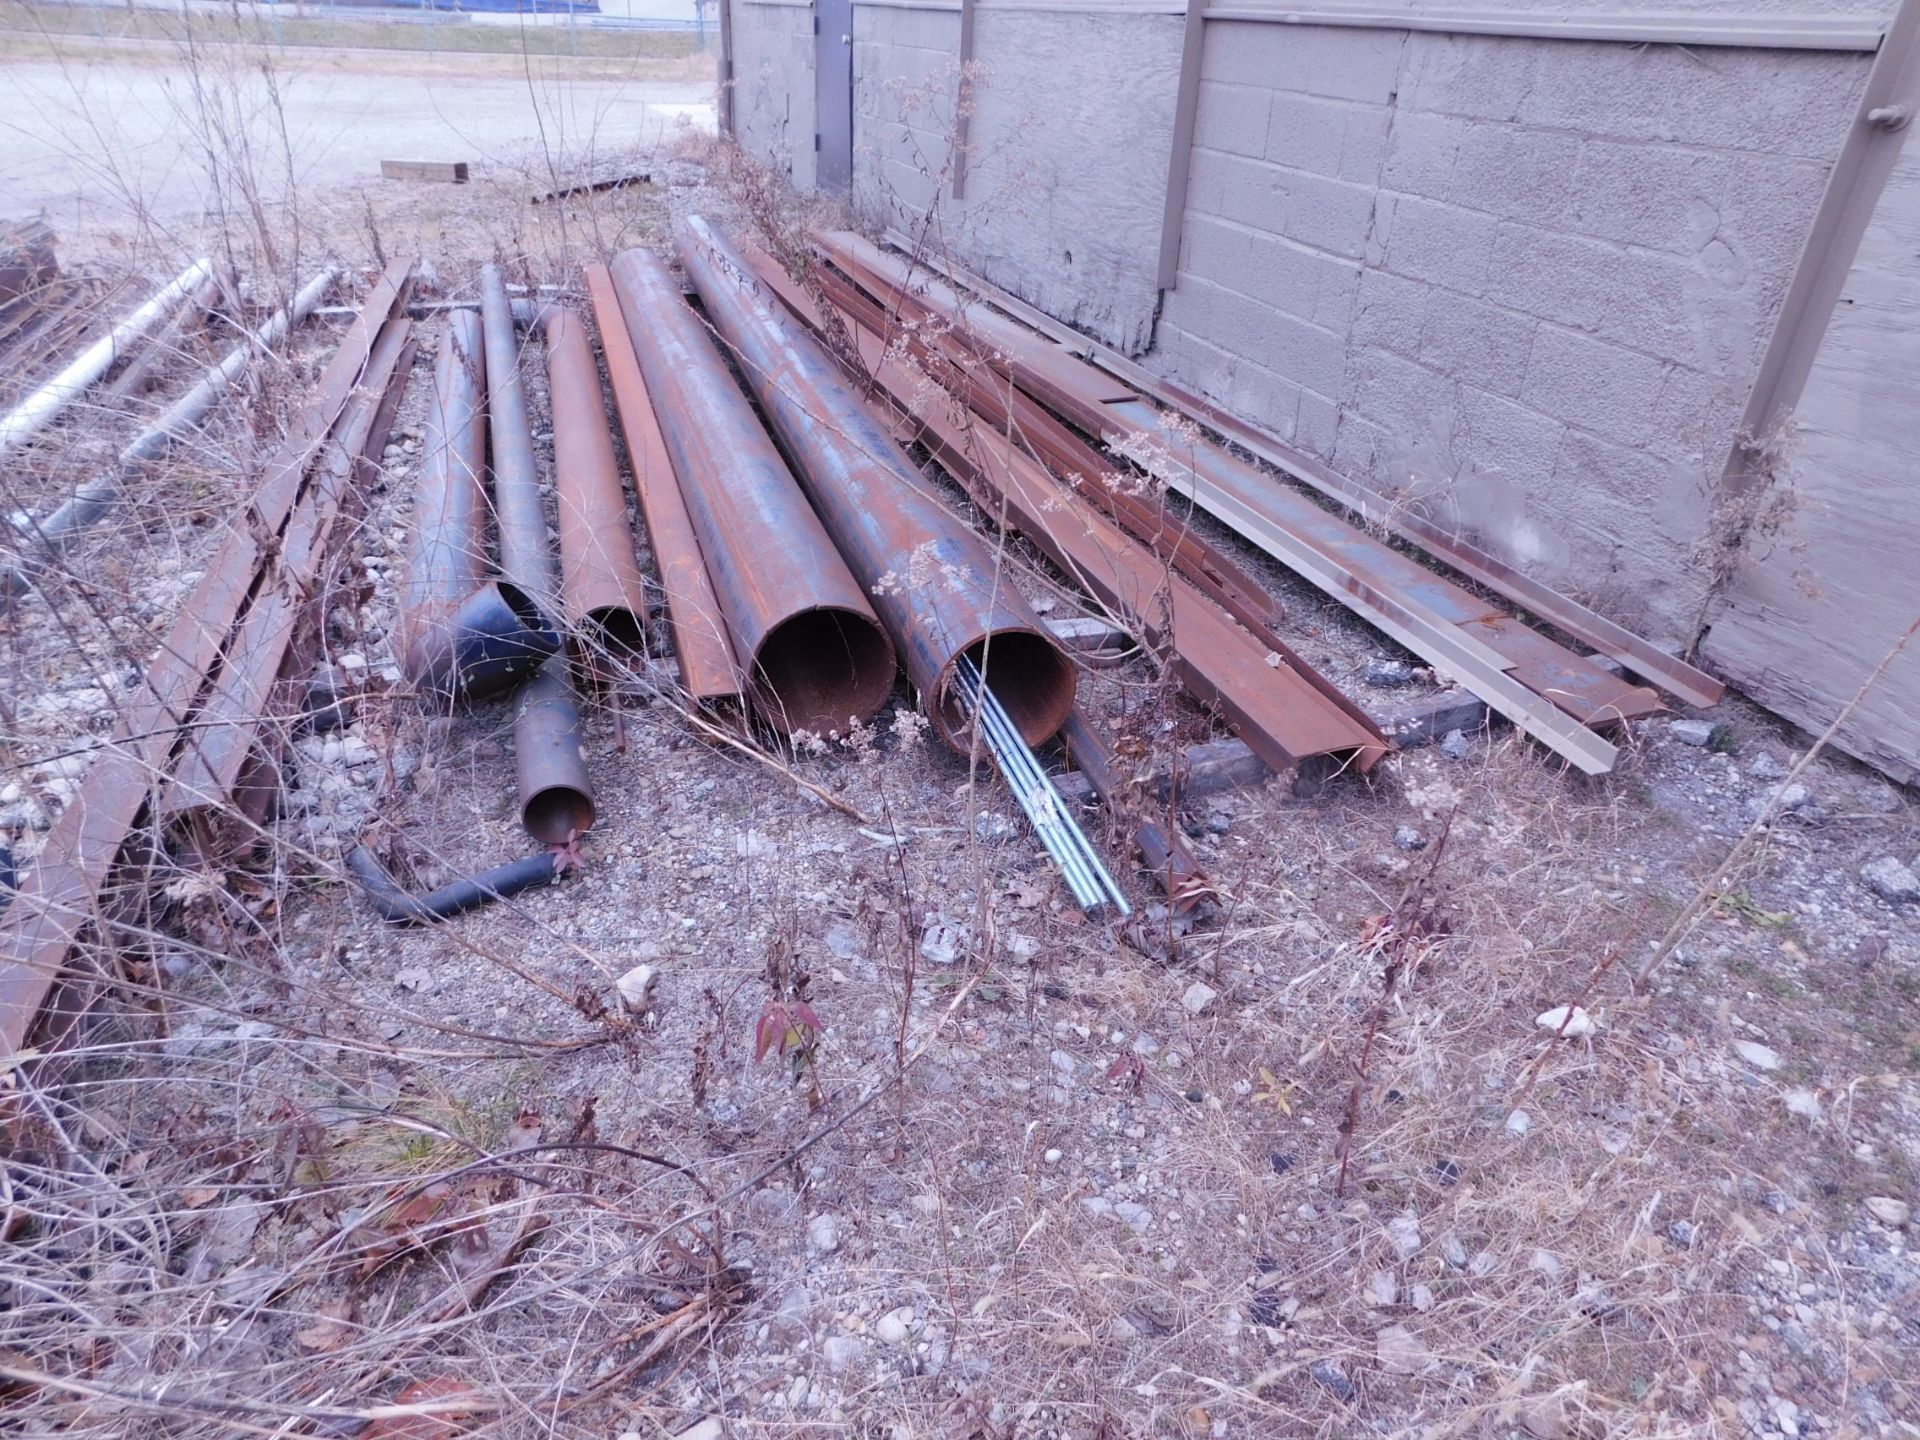 Lot of Angle Iron, Pipe, Tubing, Saw Horses and Tables - Image 5 of 6